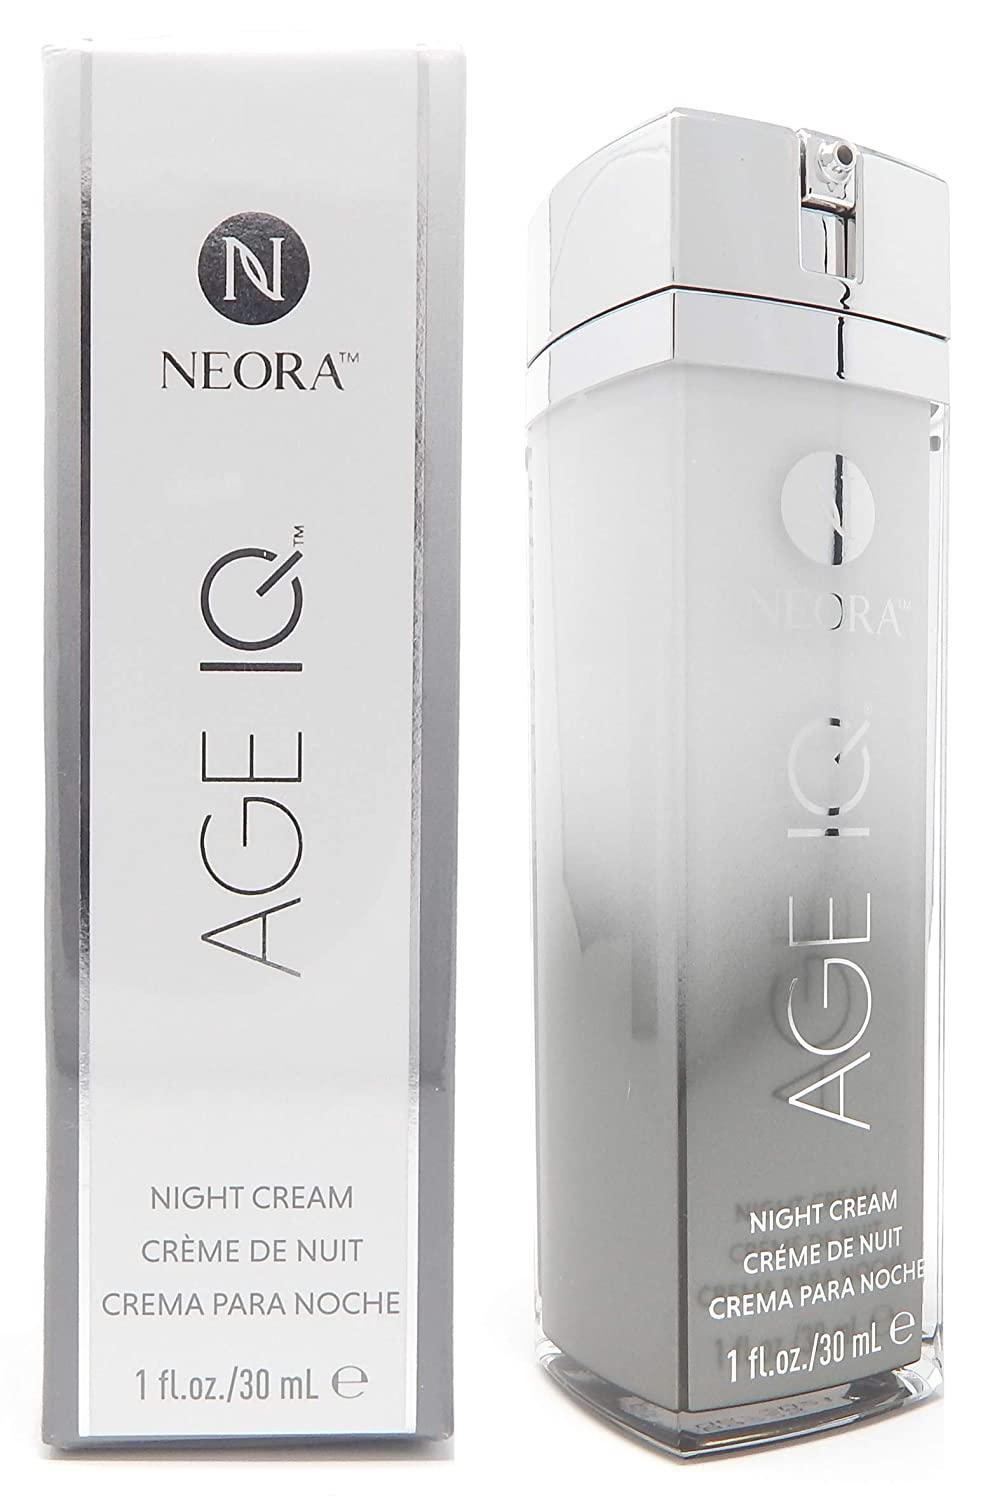 Neora the brand of care for skin and happiness in beauty